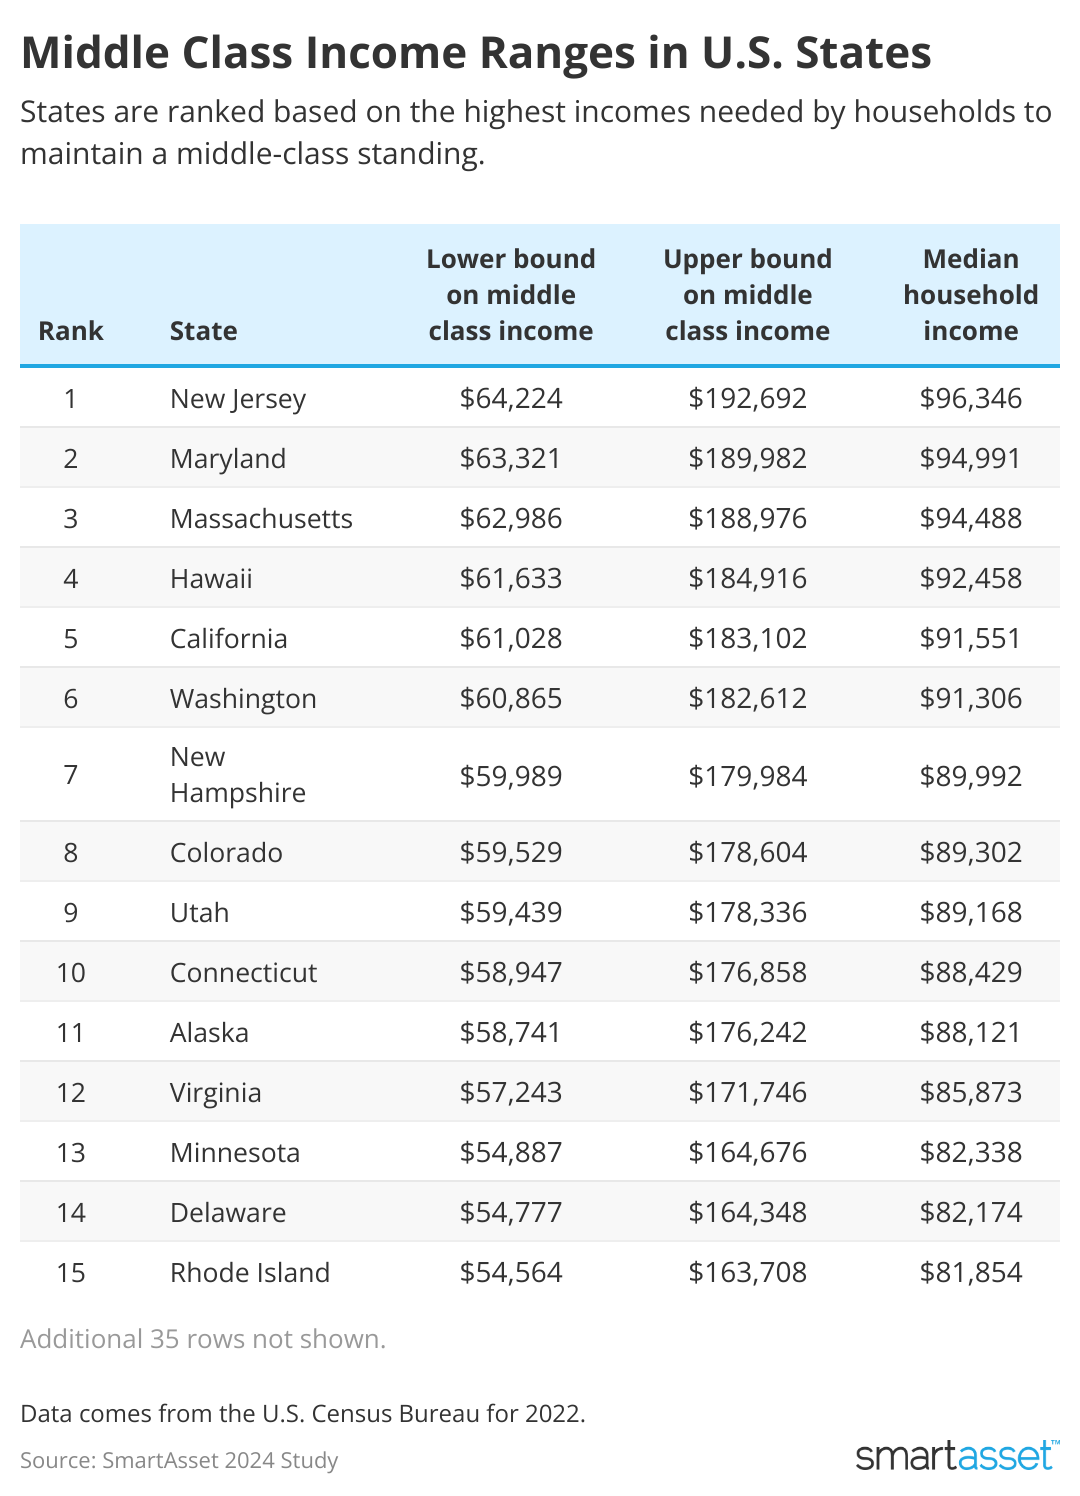 Table showing “Middle Class Income Ranges in U.S. States.”